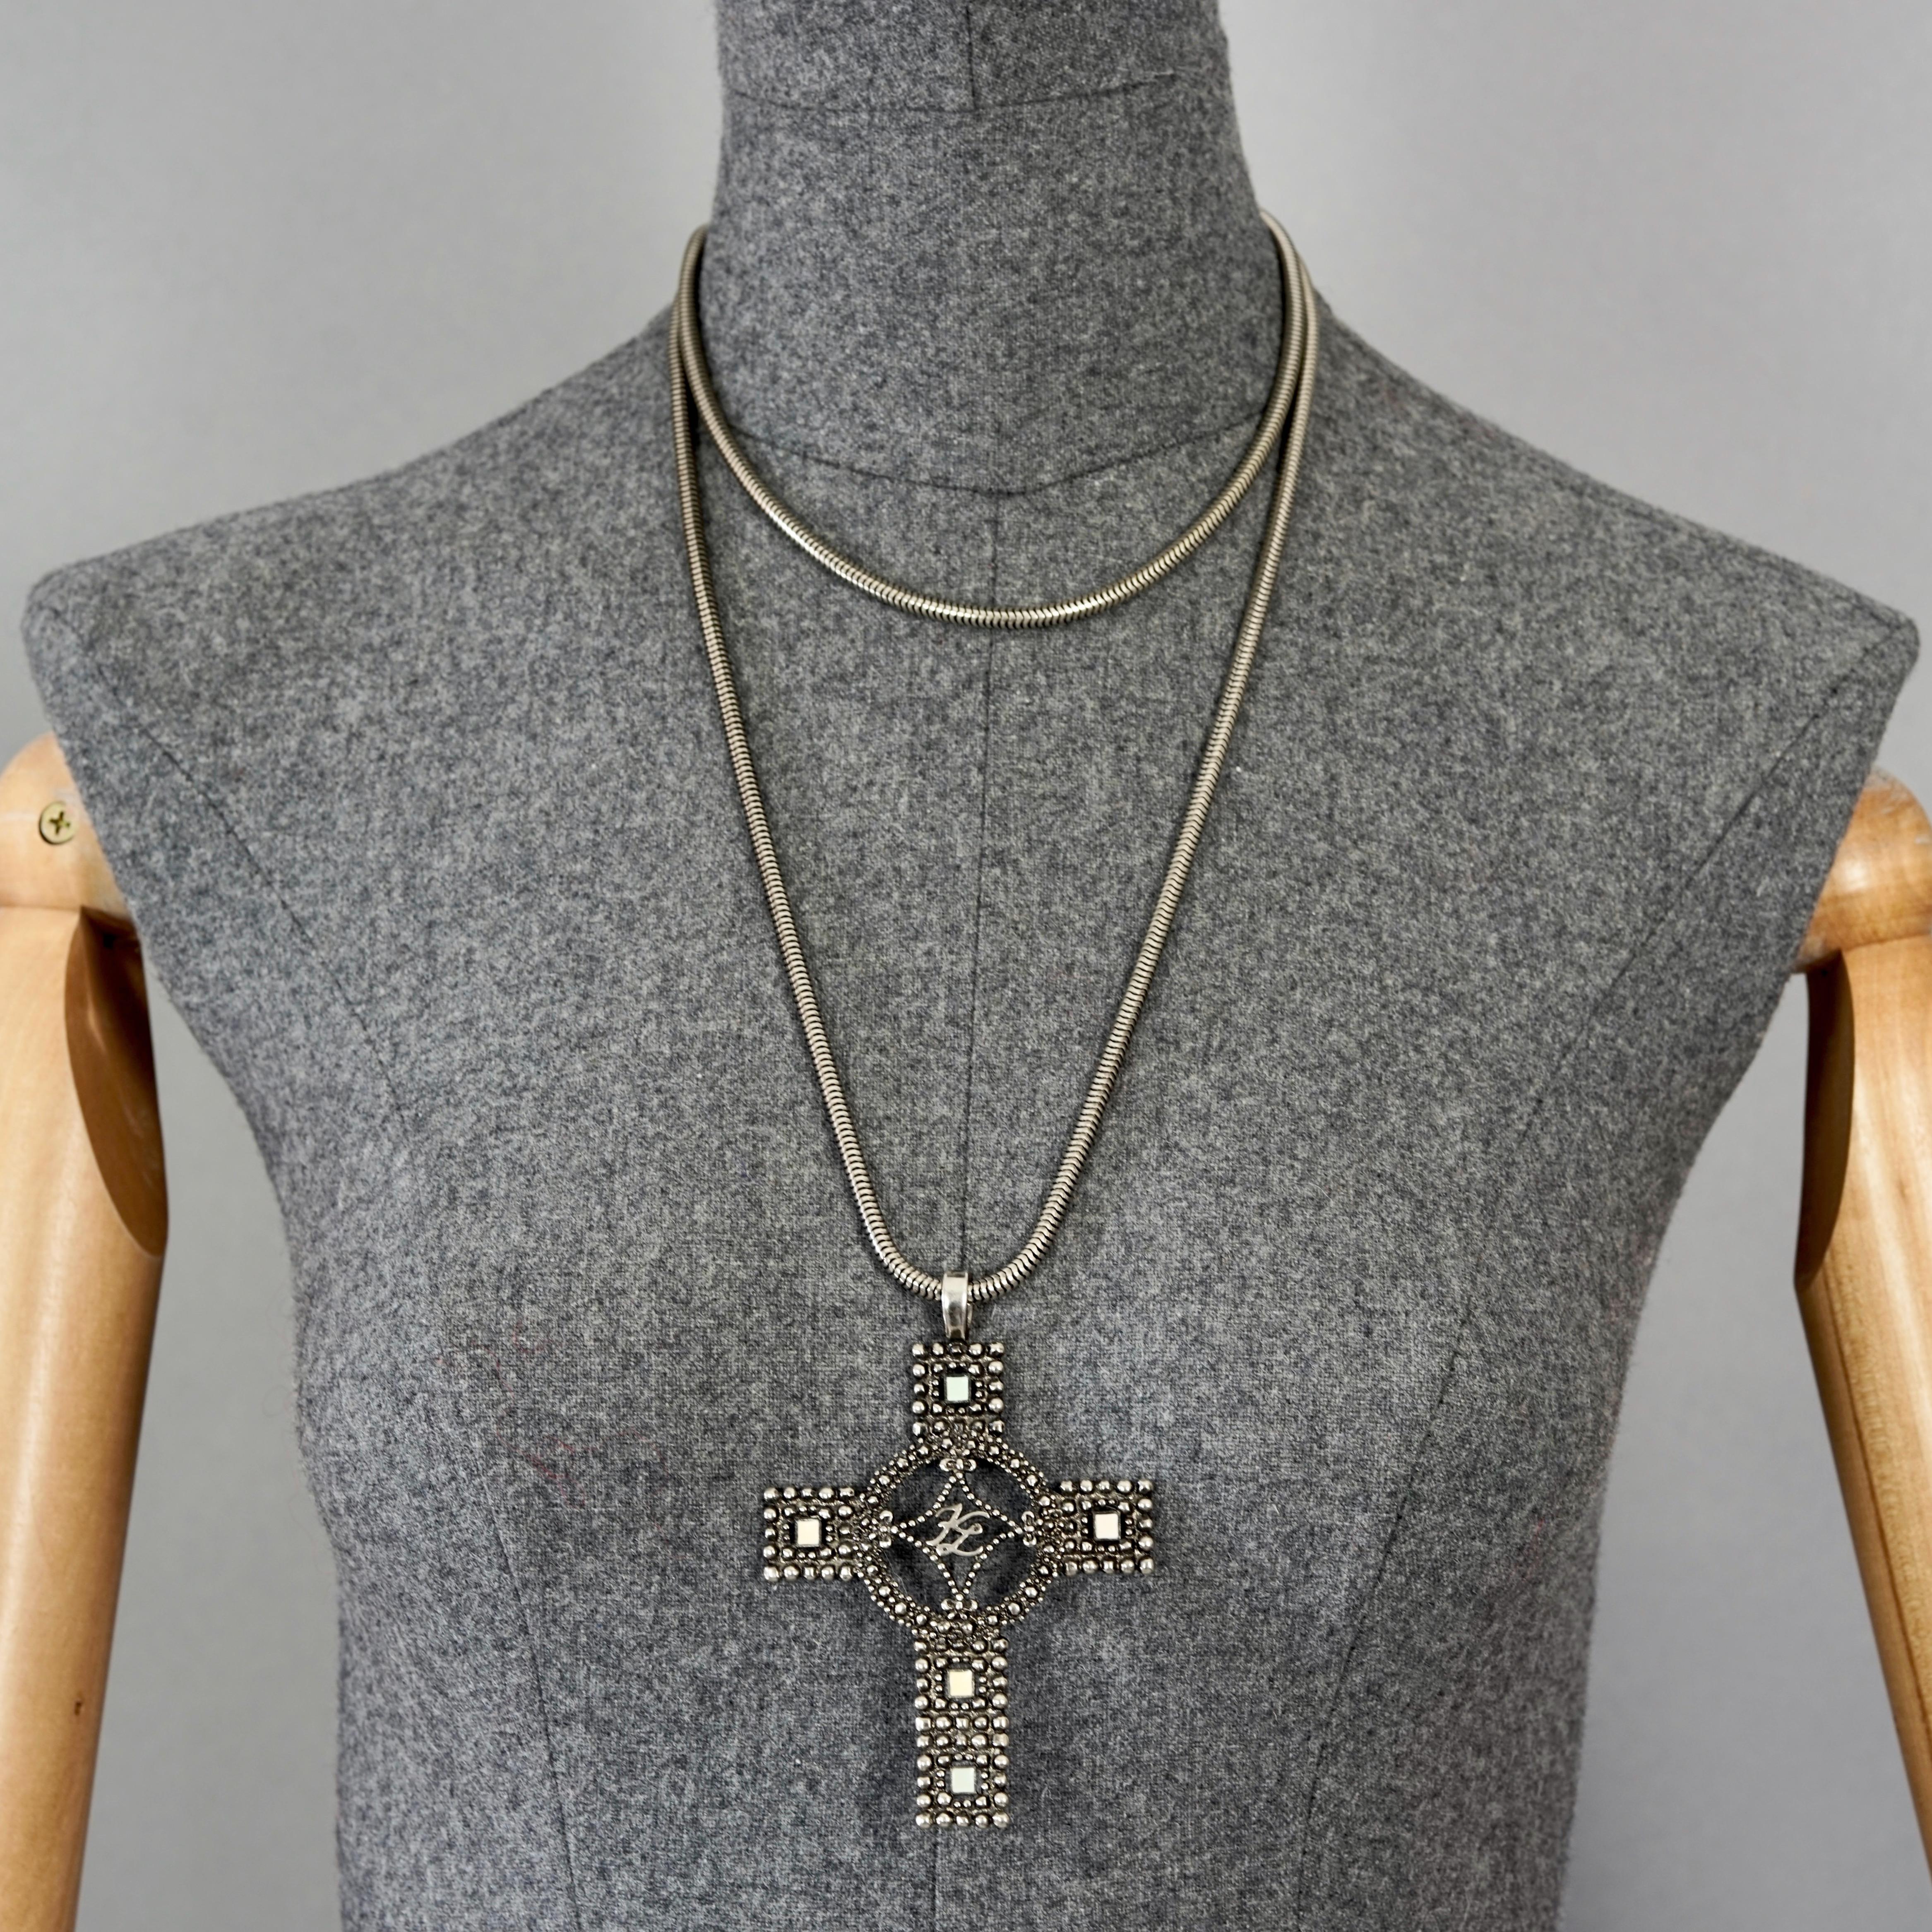 Vintage KARL LAGERFELD KL Logo Cross Long Necklace

Measurements:
Height: 3.34 inches (8.5 cm)
Width: 2.68 inches (6.8 cm)
Length: 42.12 inches to 45.27 inches (107 cm to 115 cm)

Features:
- 100% Authentic KARL LAGERFELD.
- Long snake chain